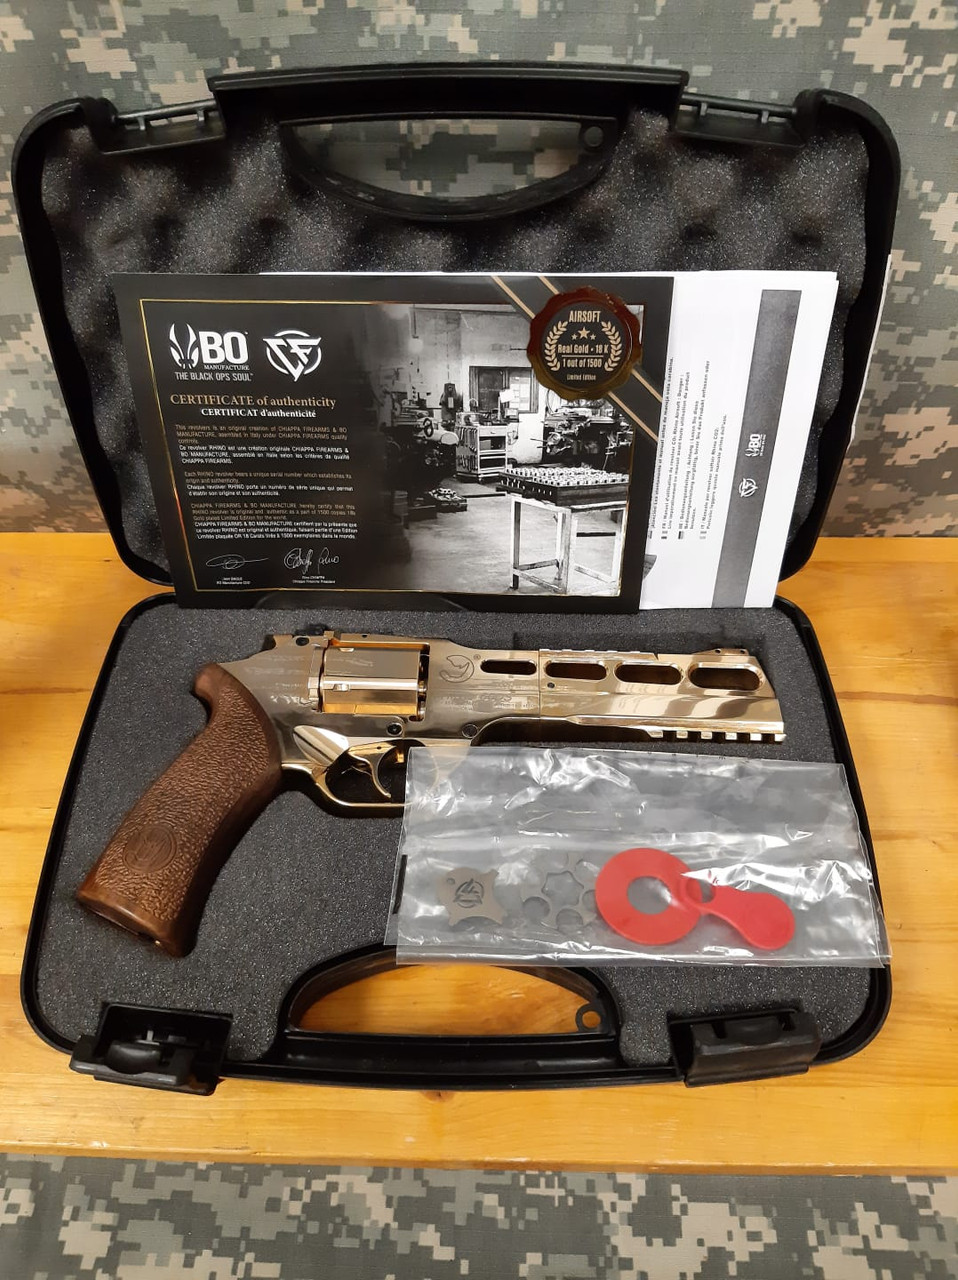 CHIAPPA FIREARMS RHINO REVOLVER 60DS 6mm BB LIMITED EDITION GOLD